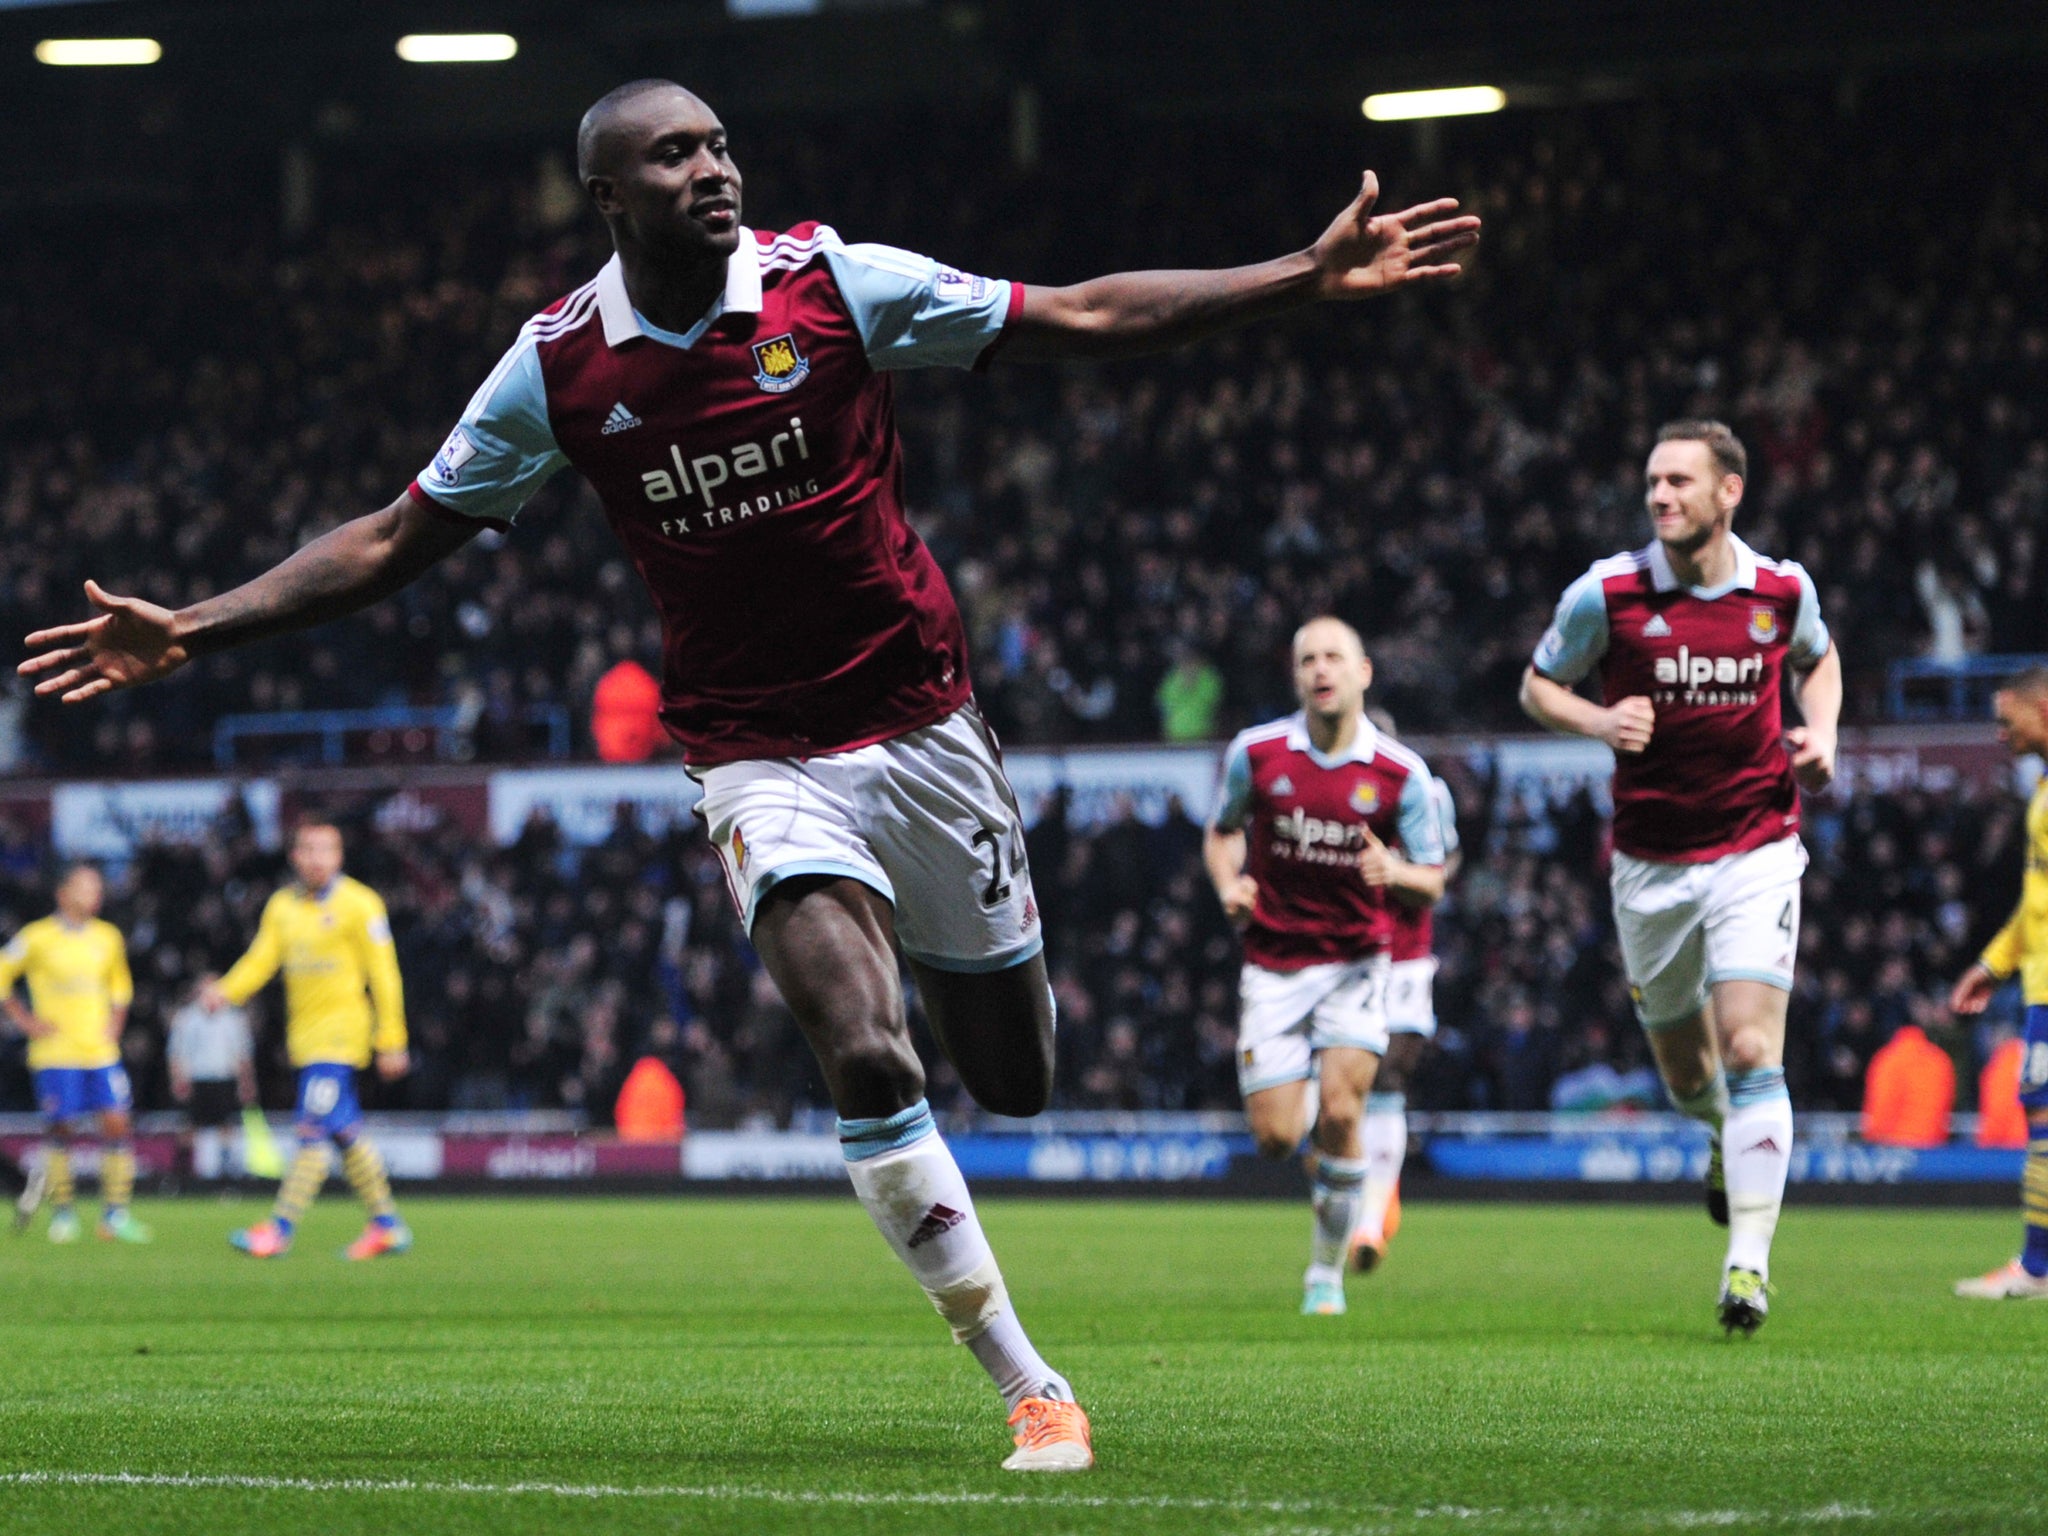 Carlton Cole celebrates after scoring for West Ham in their Boxing Day Premier League match against Arsenal